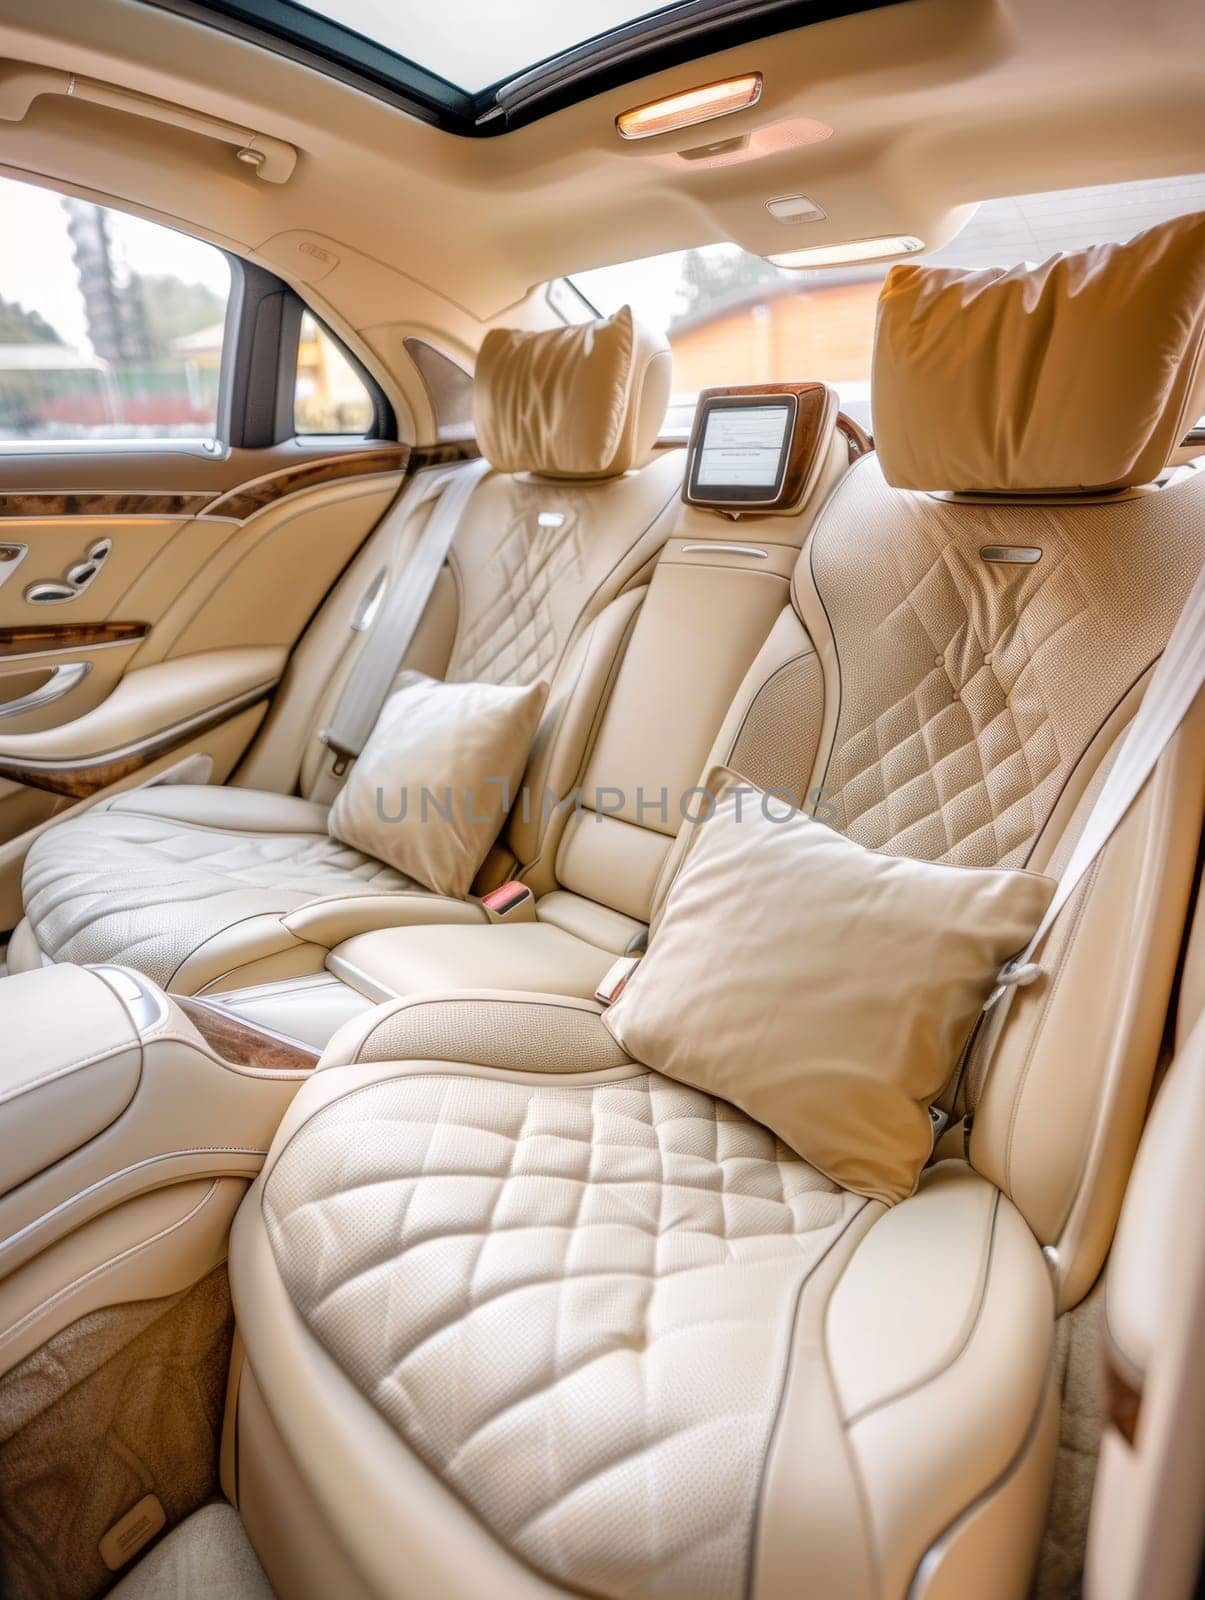 The luxurious cabin of a high-end vehicle is outfitted with quilted leather seats, exuding an aura of exclusivity and sophistication. Detailed workmanship speaks to a bespoke automotive experience